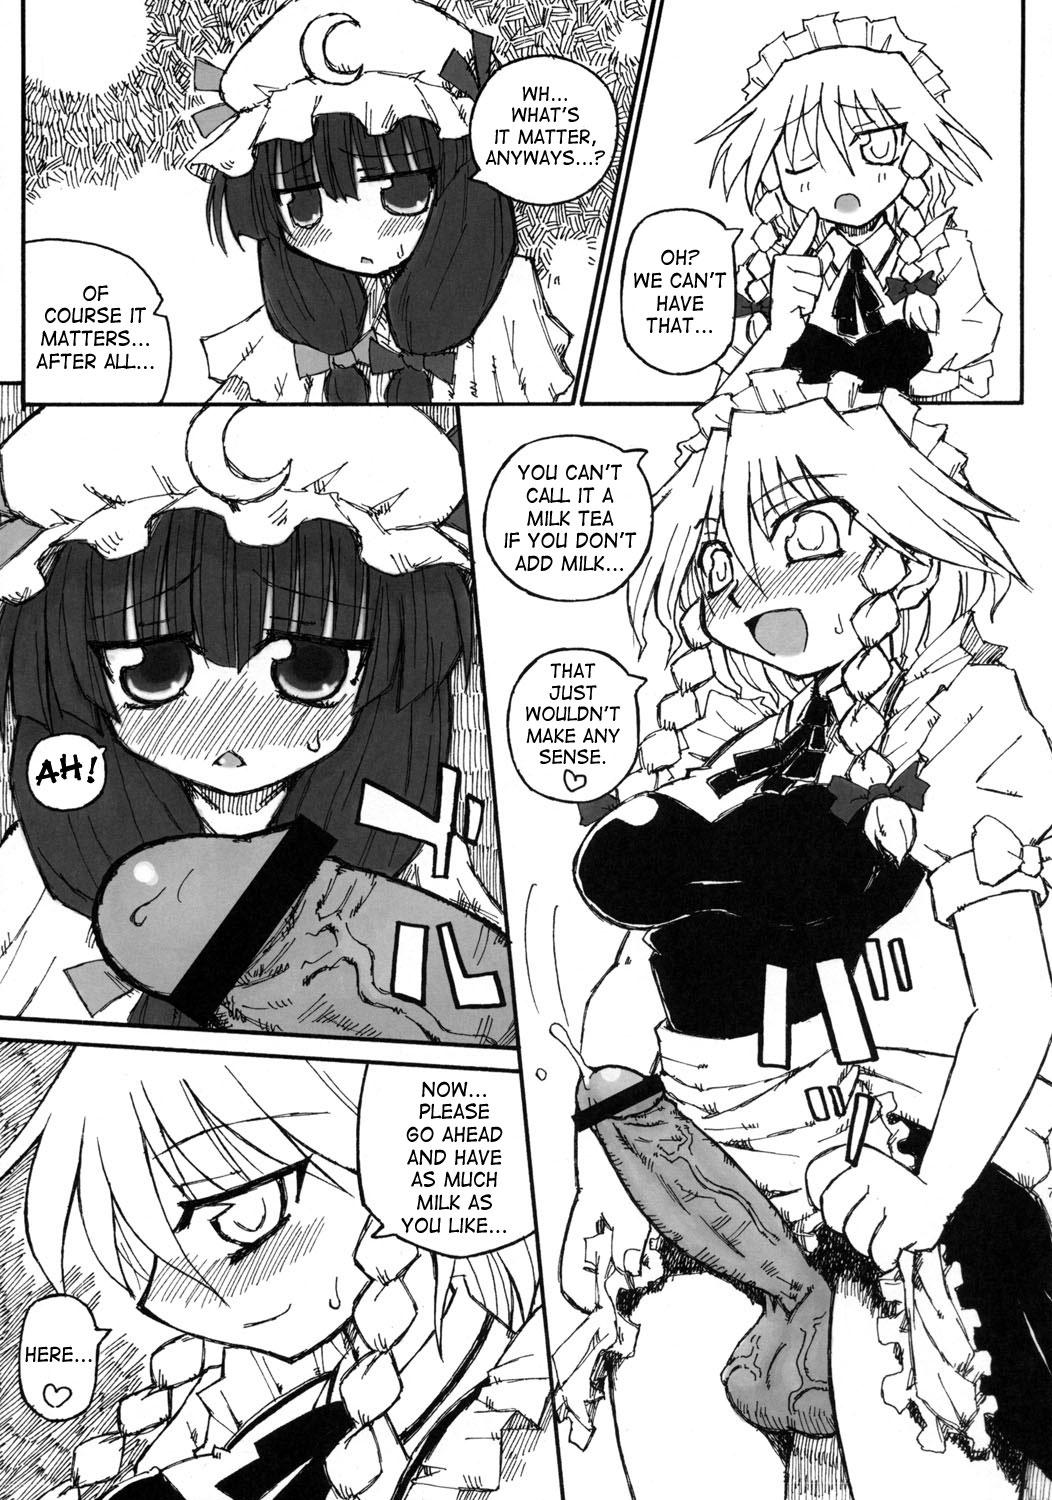 Stepdaughter Seireitsukai no Gogo | Afternoon of The Sorceress - Touhou project Gay Domination - Page 6